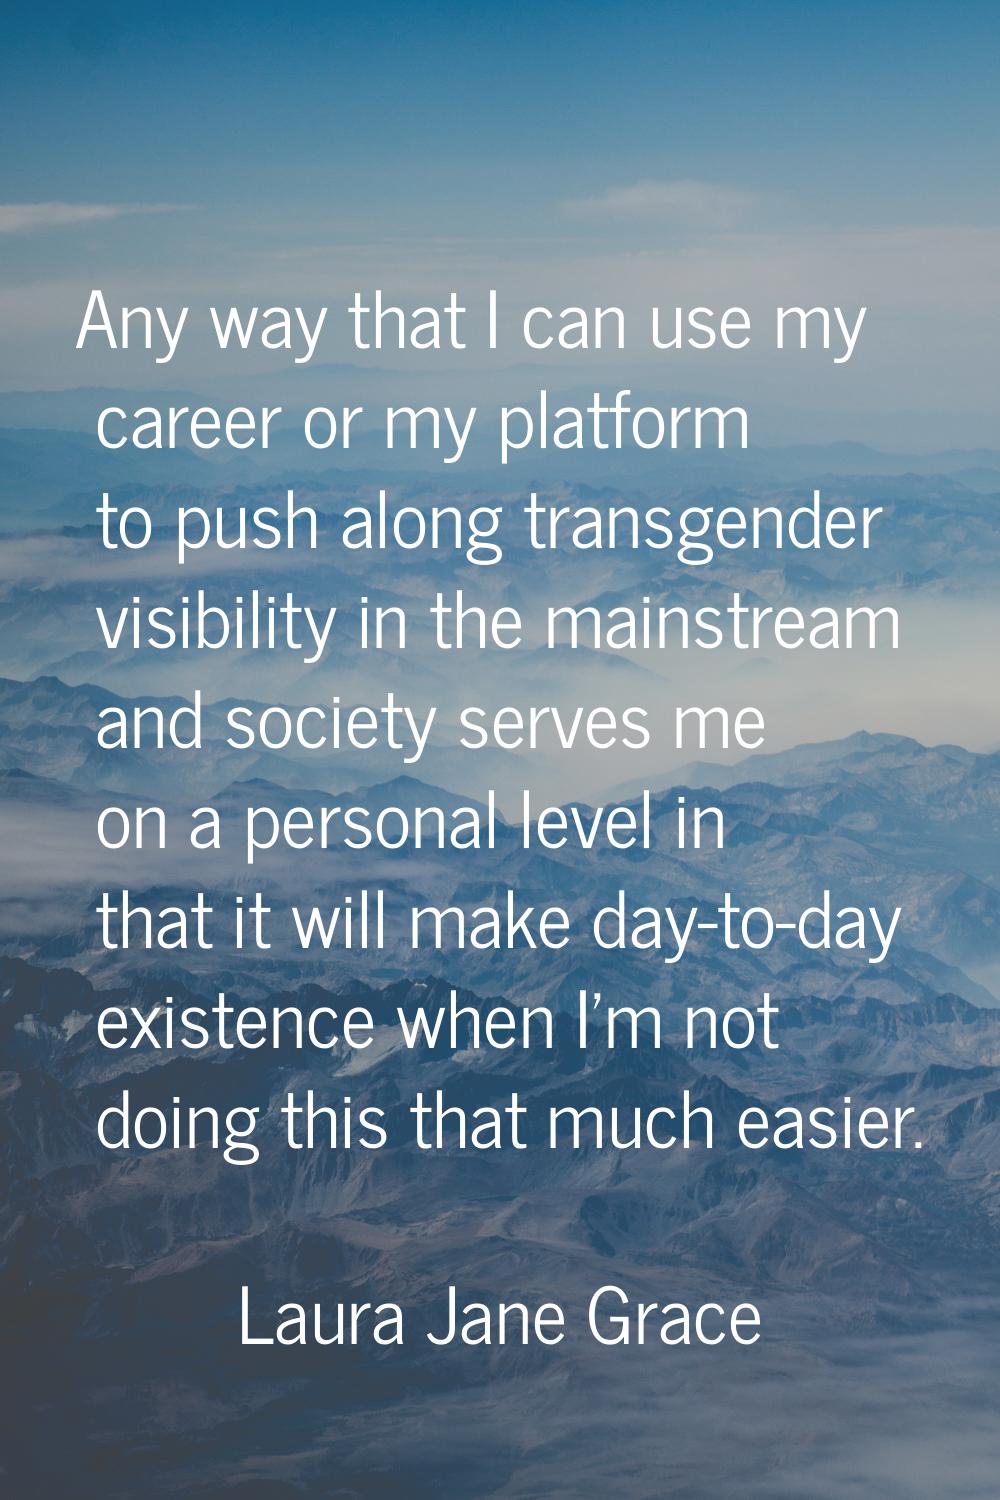 Any way that I can use my career or my platform to push along transgender visibility in the mainstr